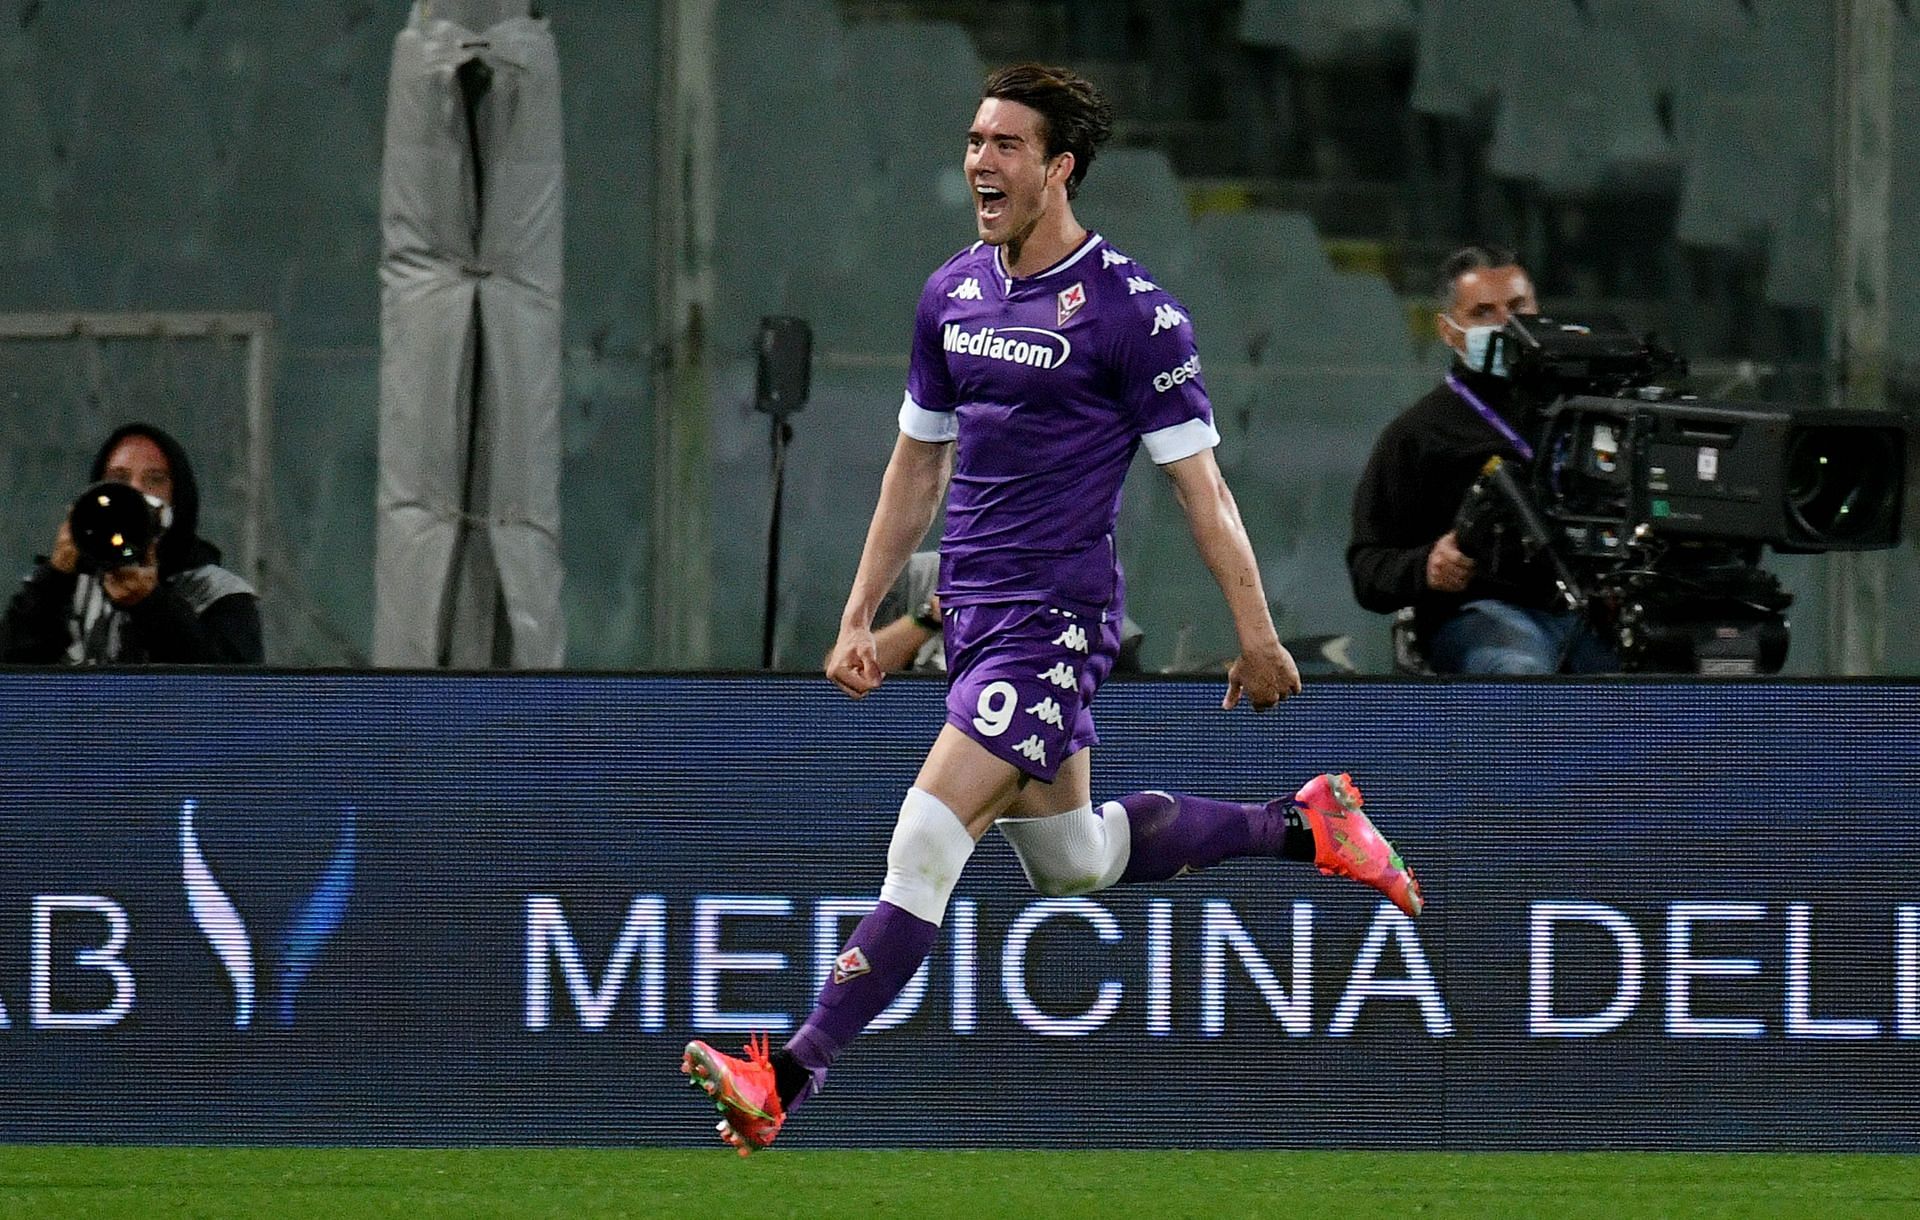 The Fiorentina forward is enjoying another prolific outing this season